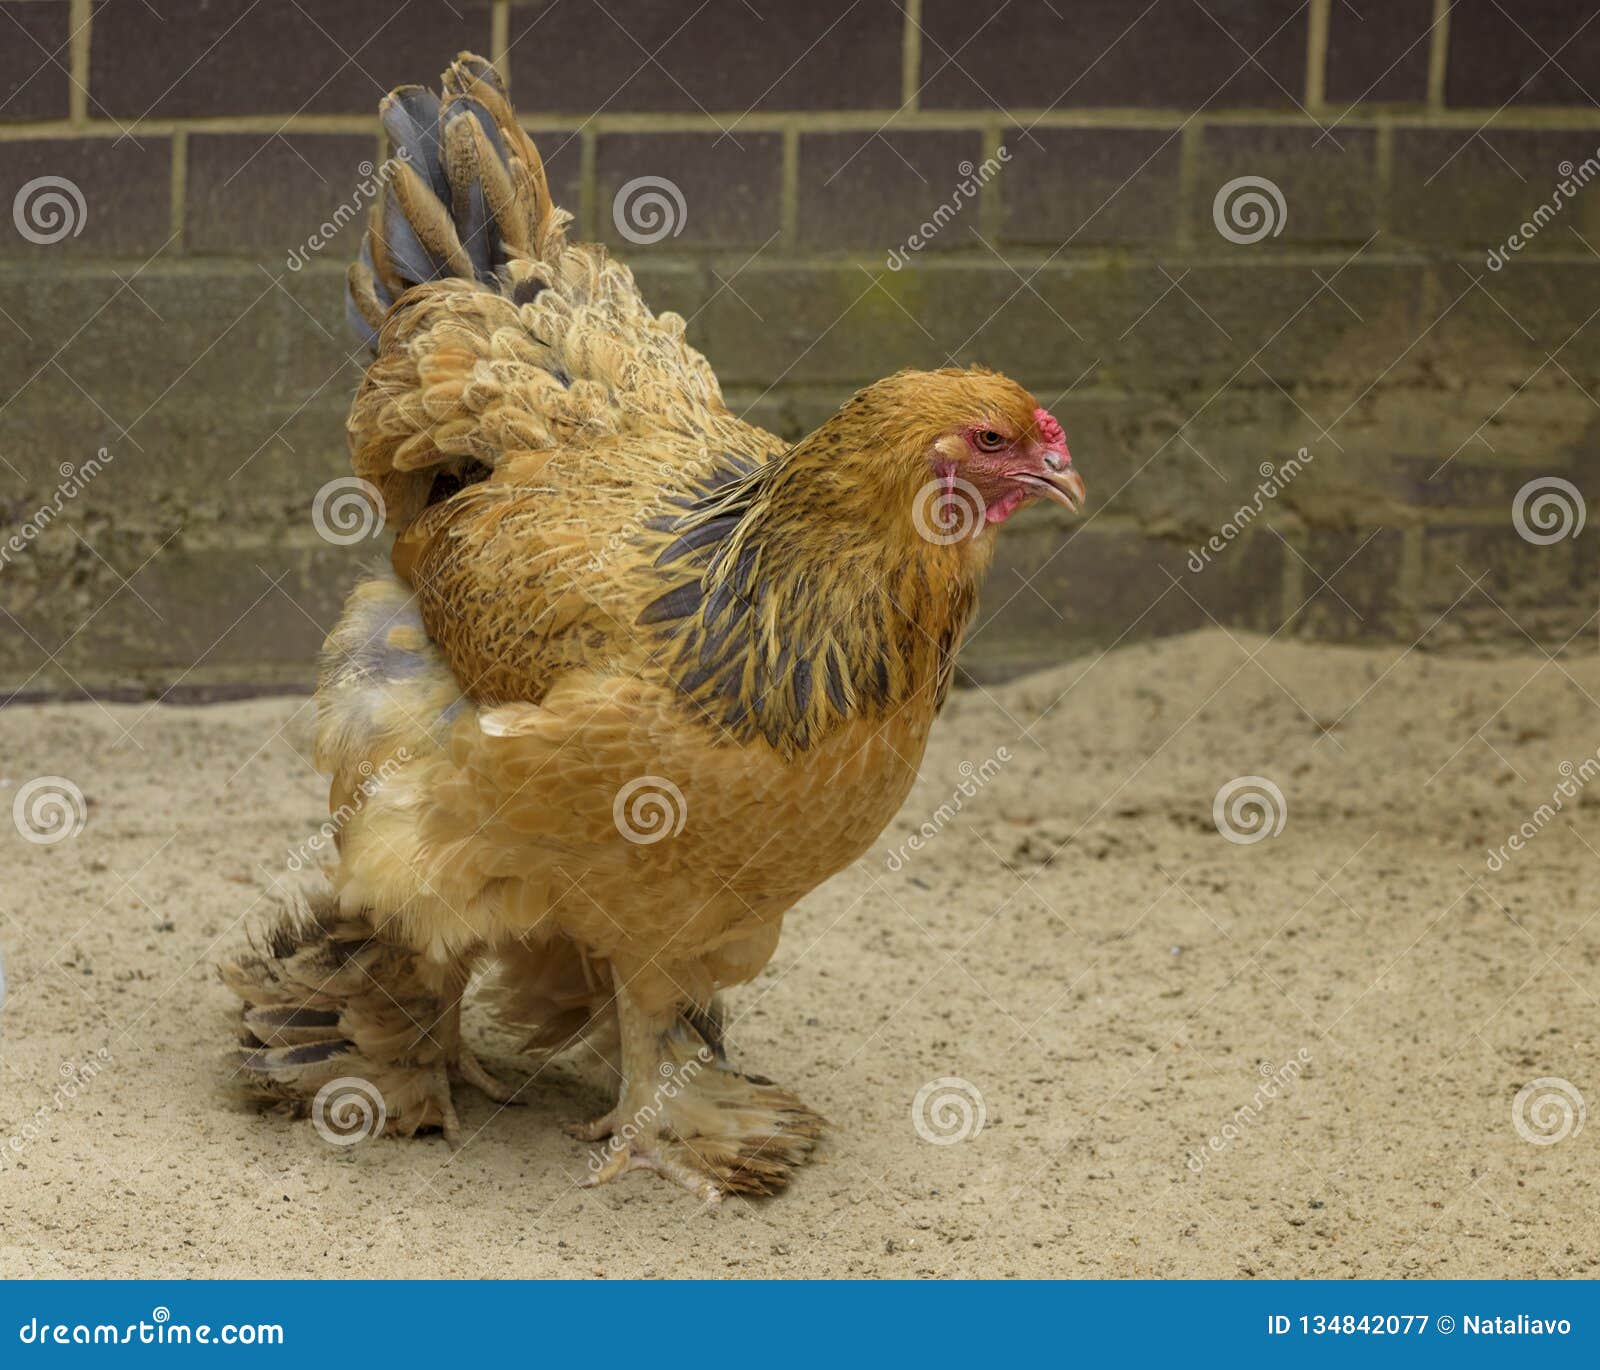 https://thumbs.dreamstime.com/z/buff-brahma-chicken-excessive-multi-colored-plumage-covers-leg-foot-gallus-gallus-domesticus-buff-brahma-chicken-134842077.jpg